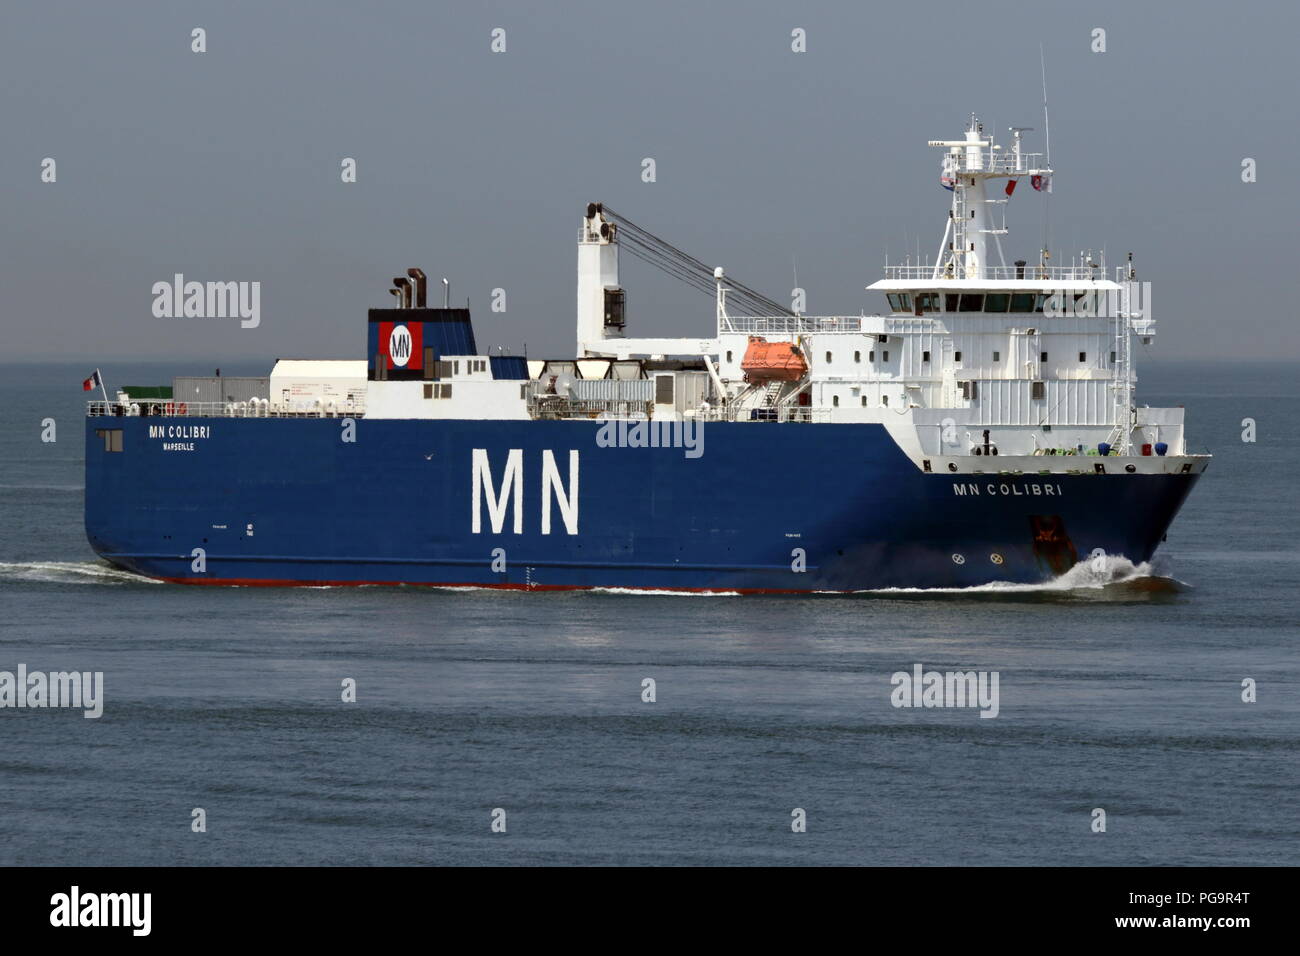 The Ro-Ro Cargo ship MN Colibri reaches the port of Rotterdam on 27 July 2018. Stock Photo